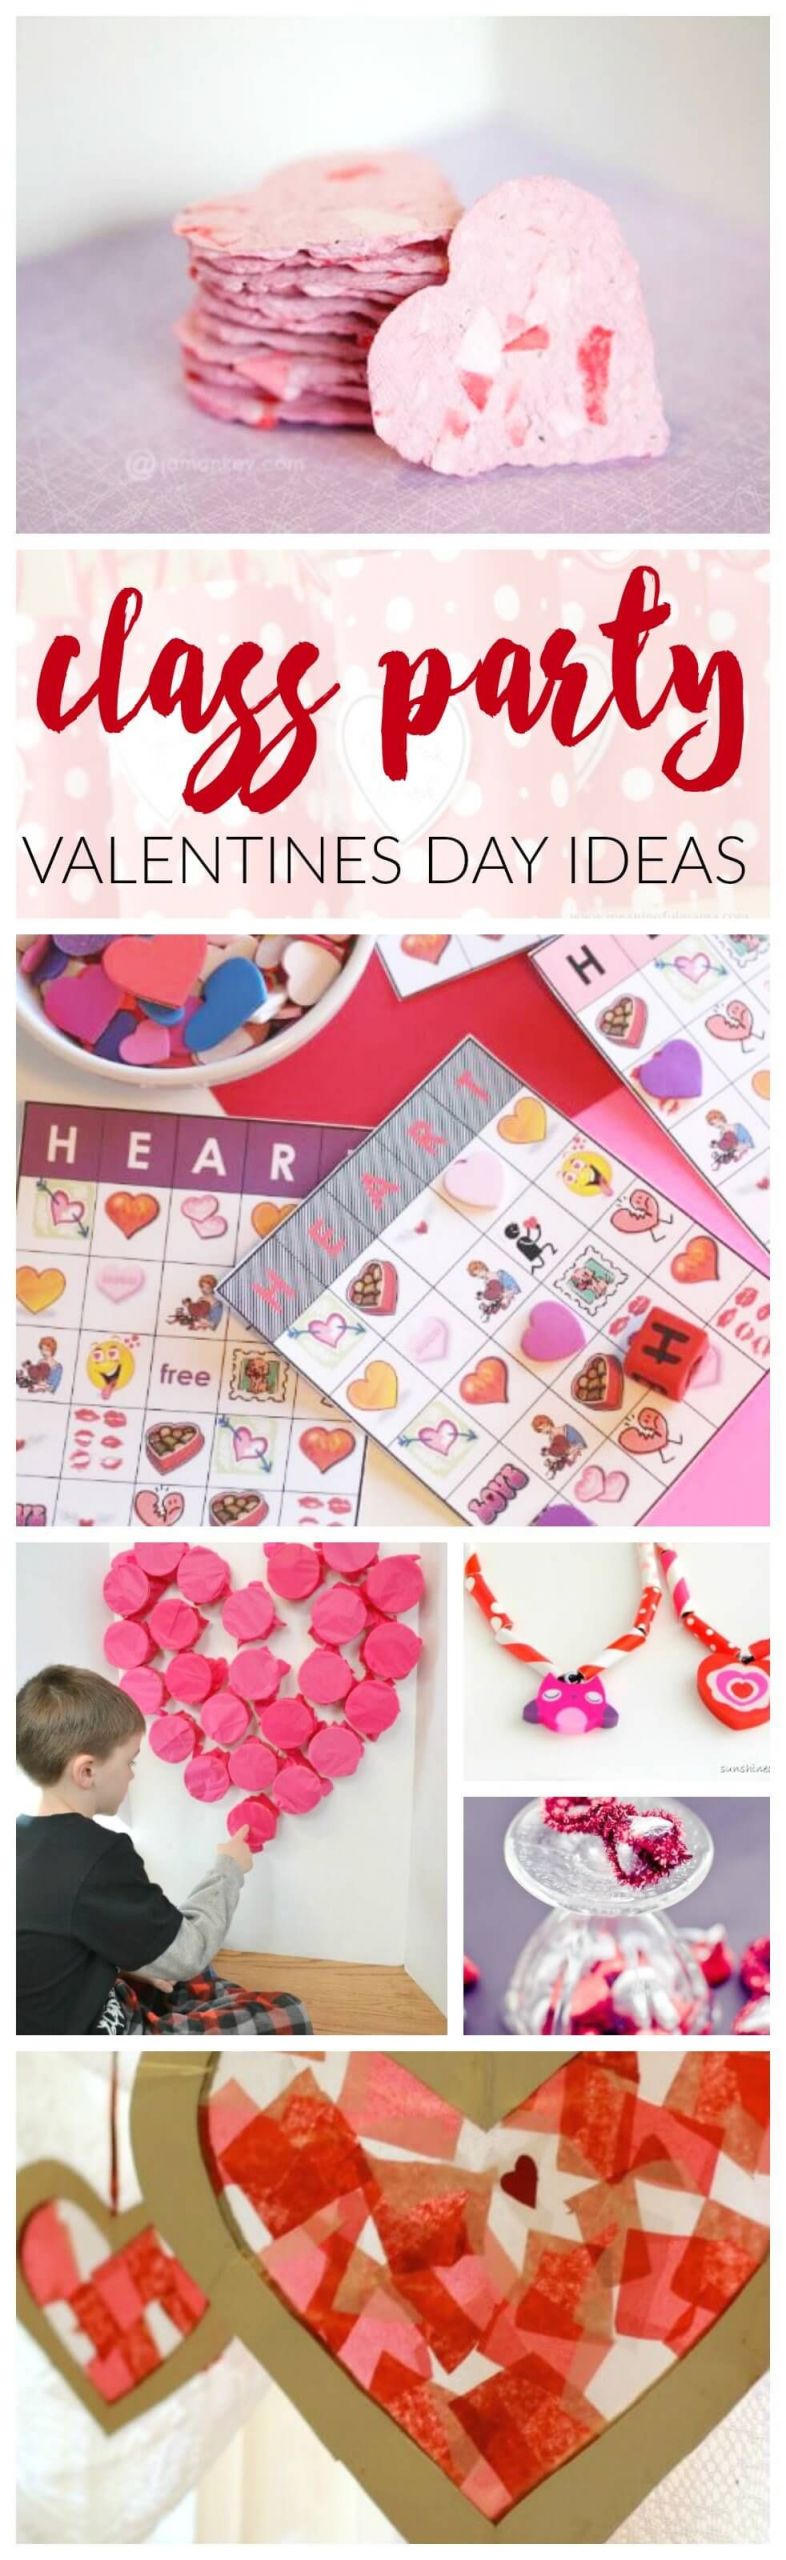 Valentine Gift Ideas For School
 class party valentines day ideas